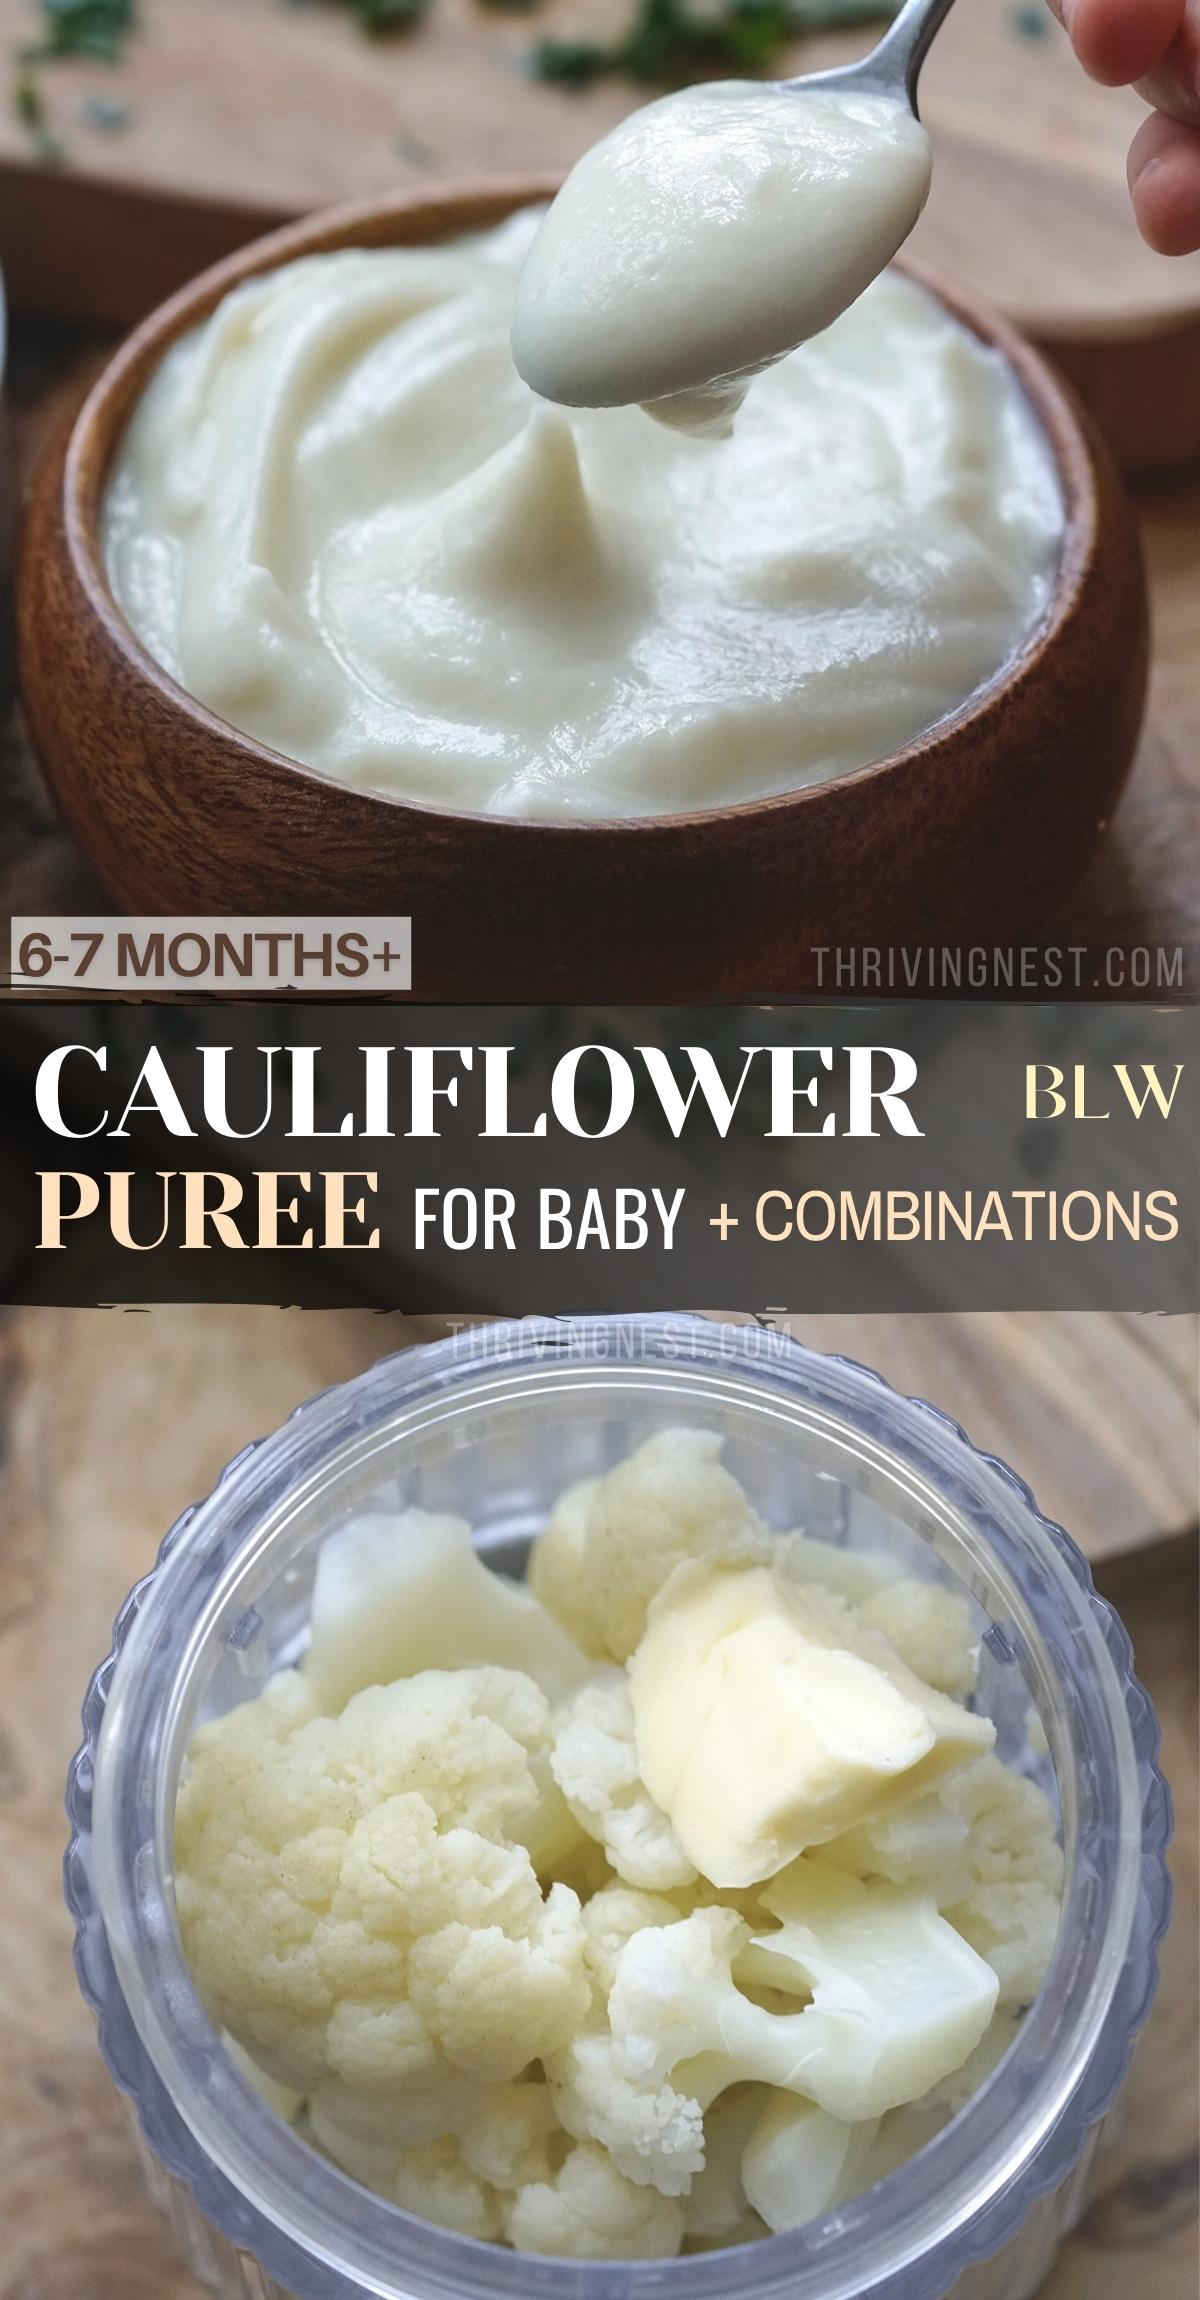 Introduce your baby to cauliflower by making a cauliflower puree. Nutrient dense cauliflower can be used in a variety of ways to make healthy baby food great as stage 1 baby food, baby led weaning or stage 2 by trying different cauliflower puree combinations. #cauliflowerpuree #babyfood #cauliflowerpureebaby #6months